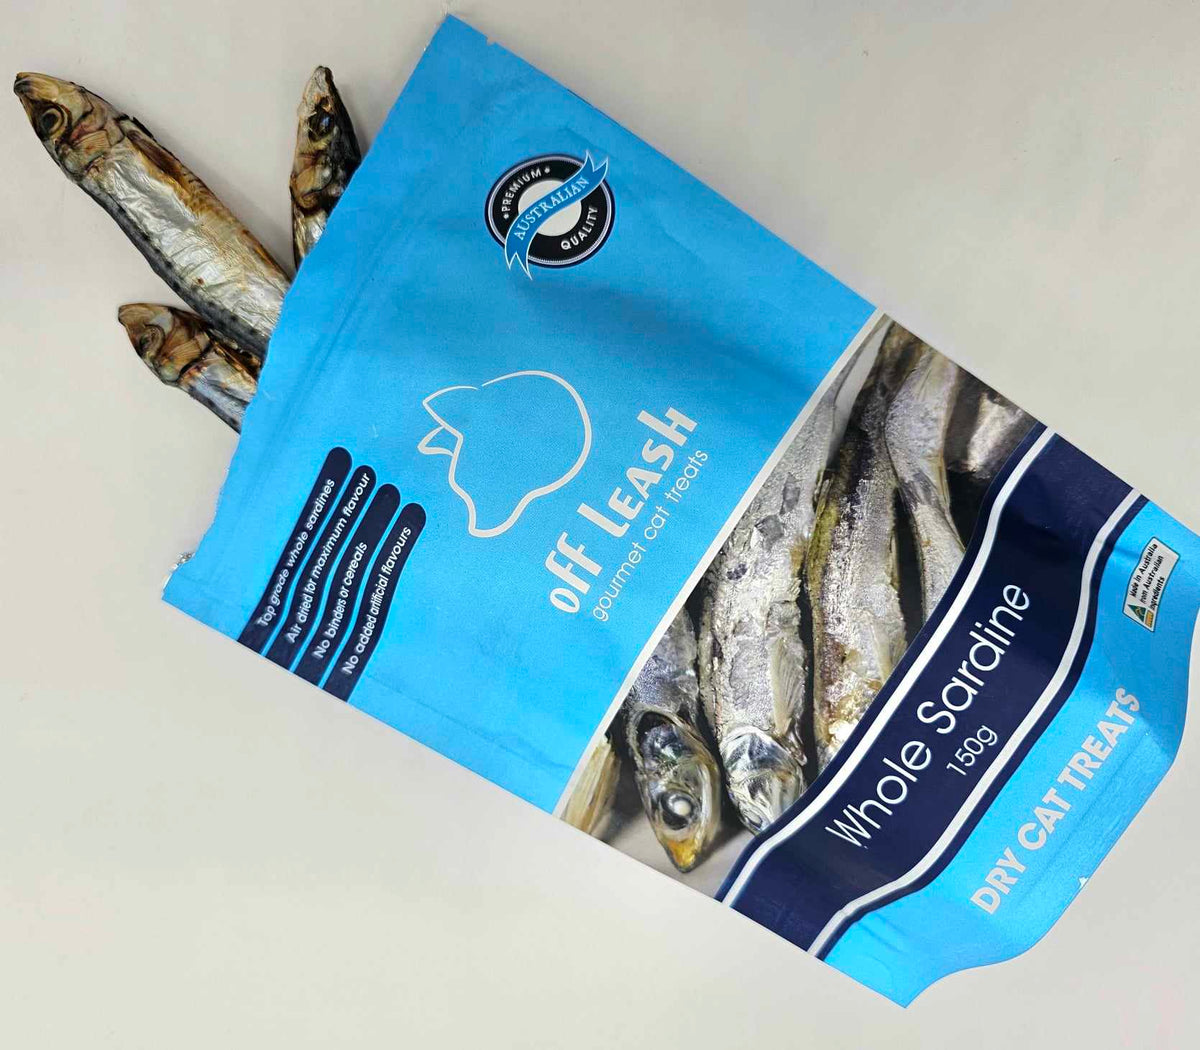 Buy Fresh Whole Sardines For Dogs & Cats - Home Delivered